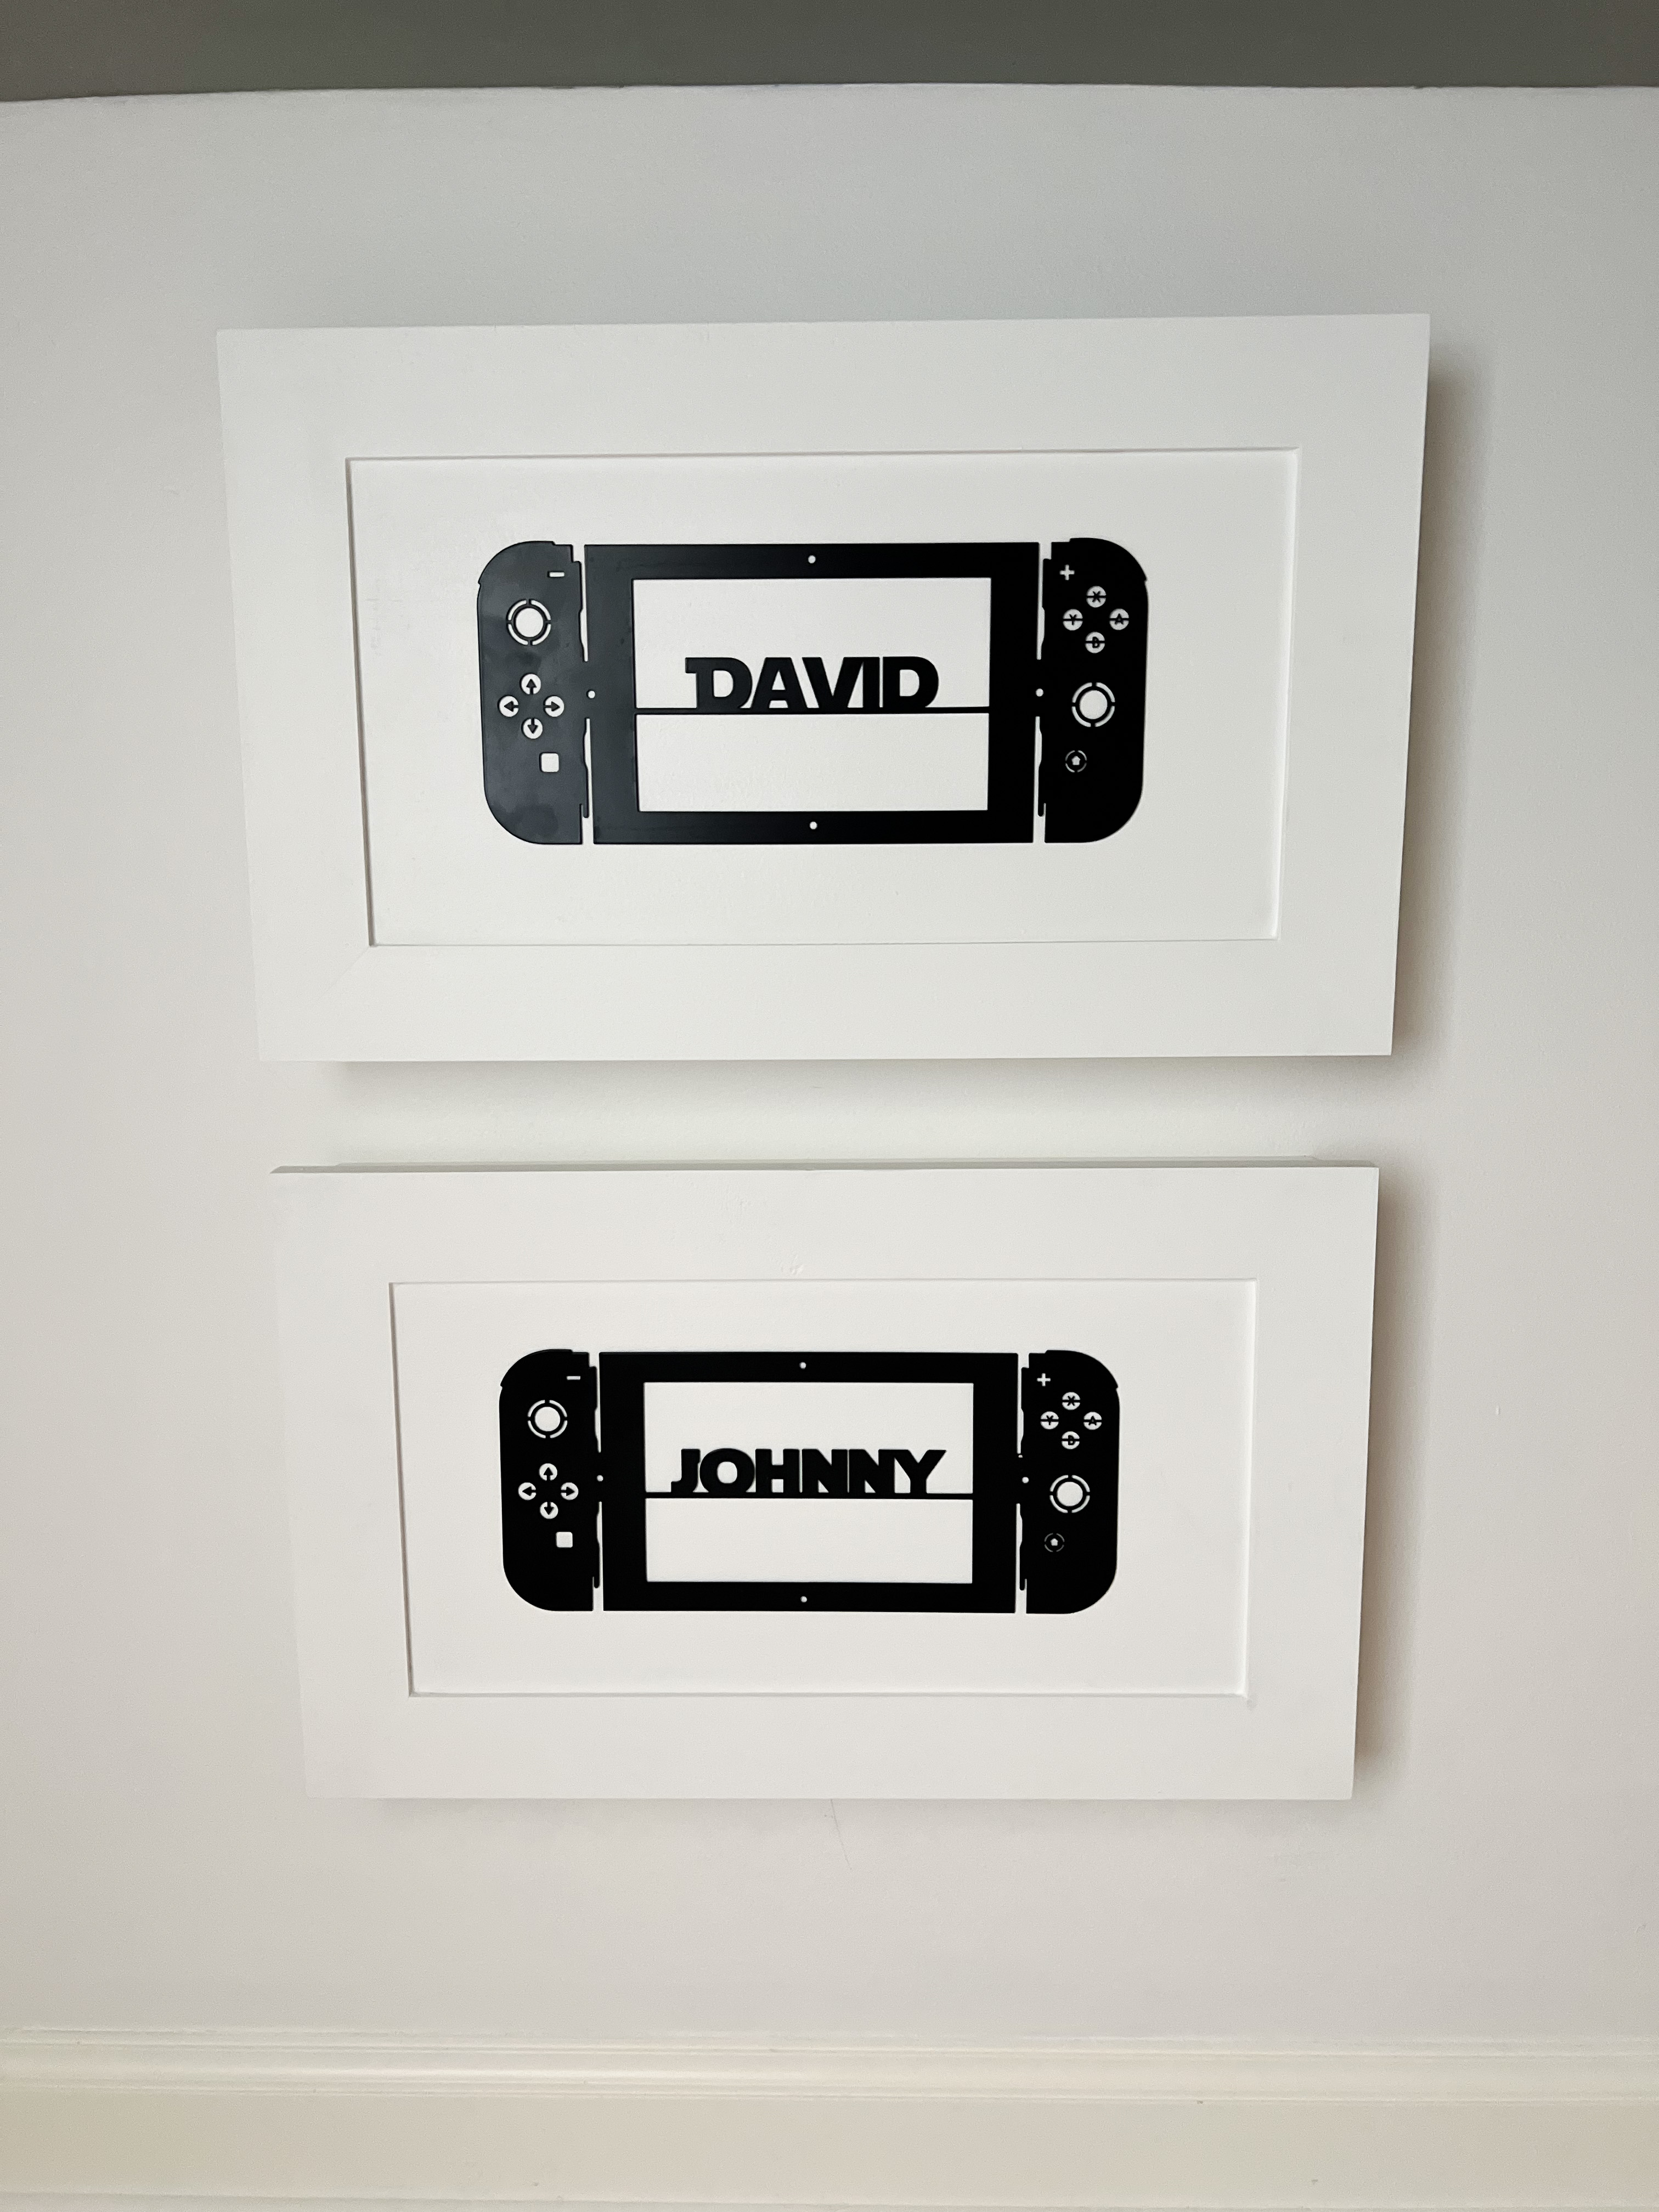 Lego cabinets closed - sowing video game controllers personalized with names.